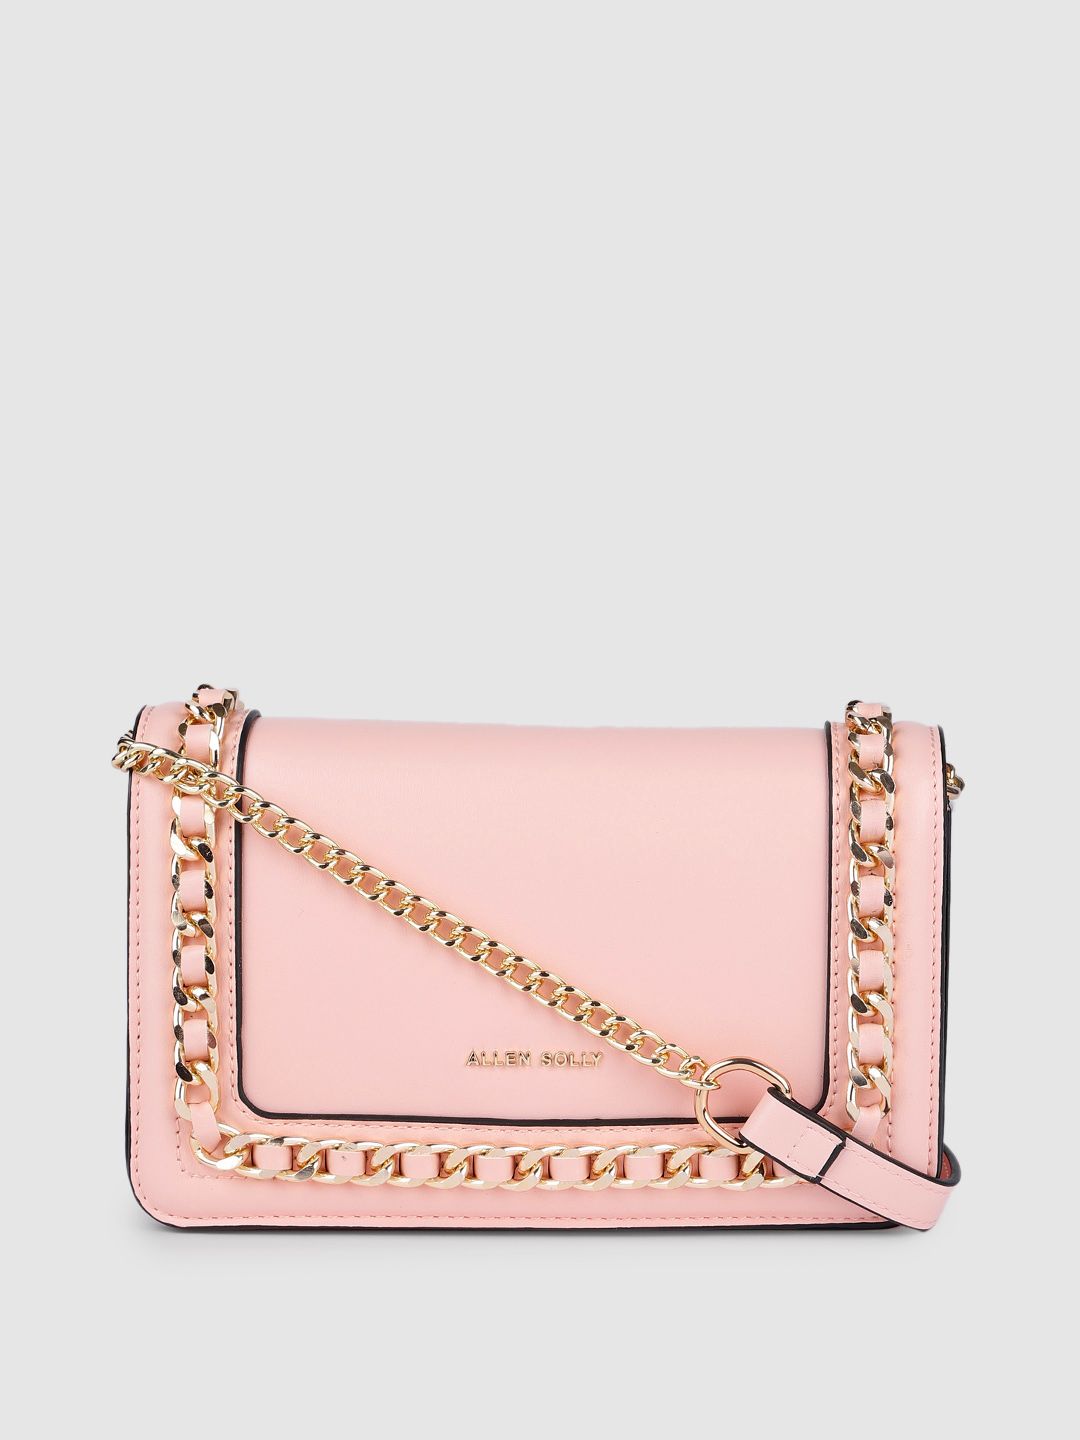 Allen Solly Pink Solid Structured Sling Bag Price in India